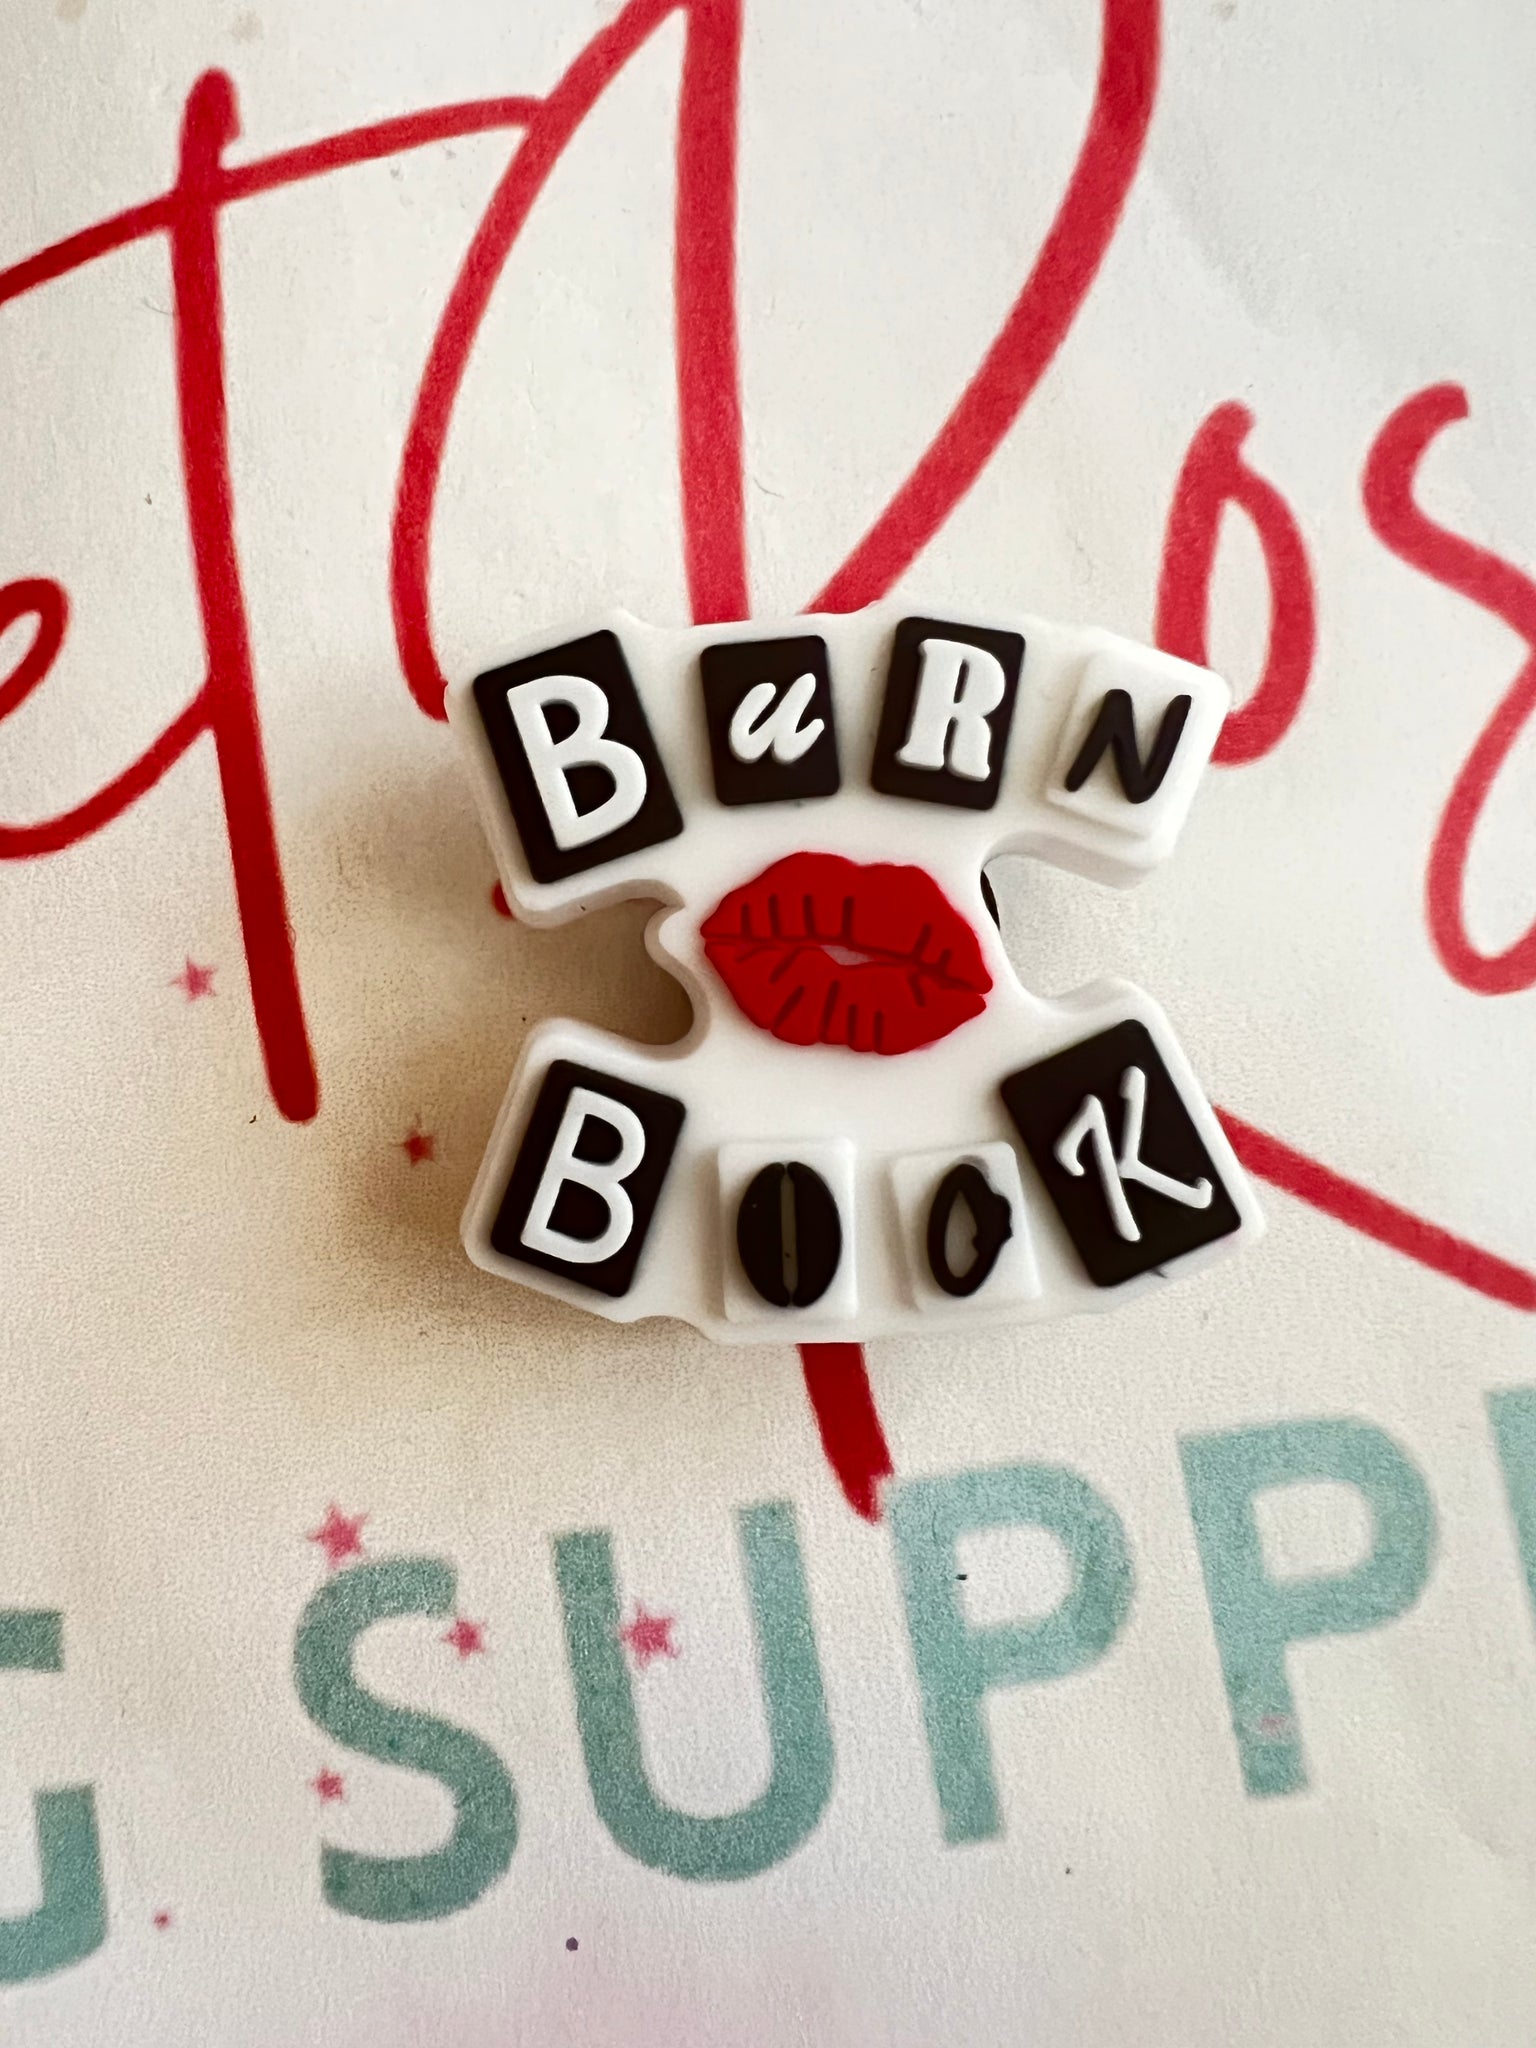 Burn Book Accessories, Charms Accessories, Burn Book Charm, Shoes